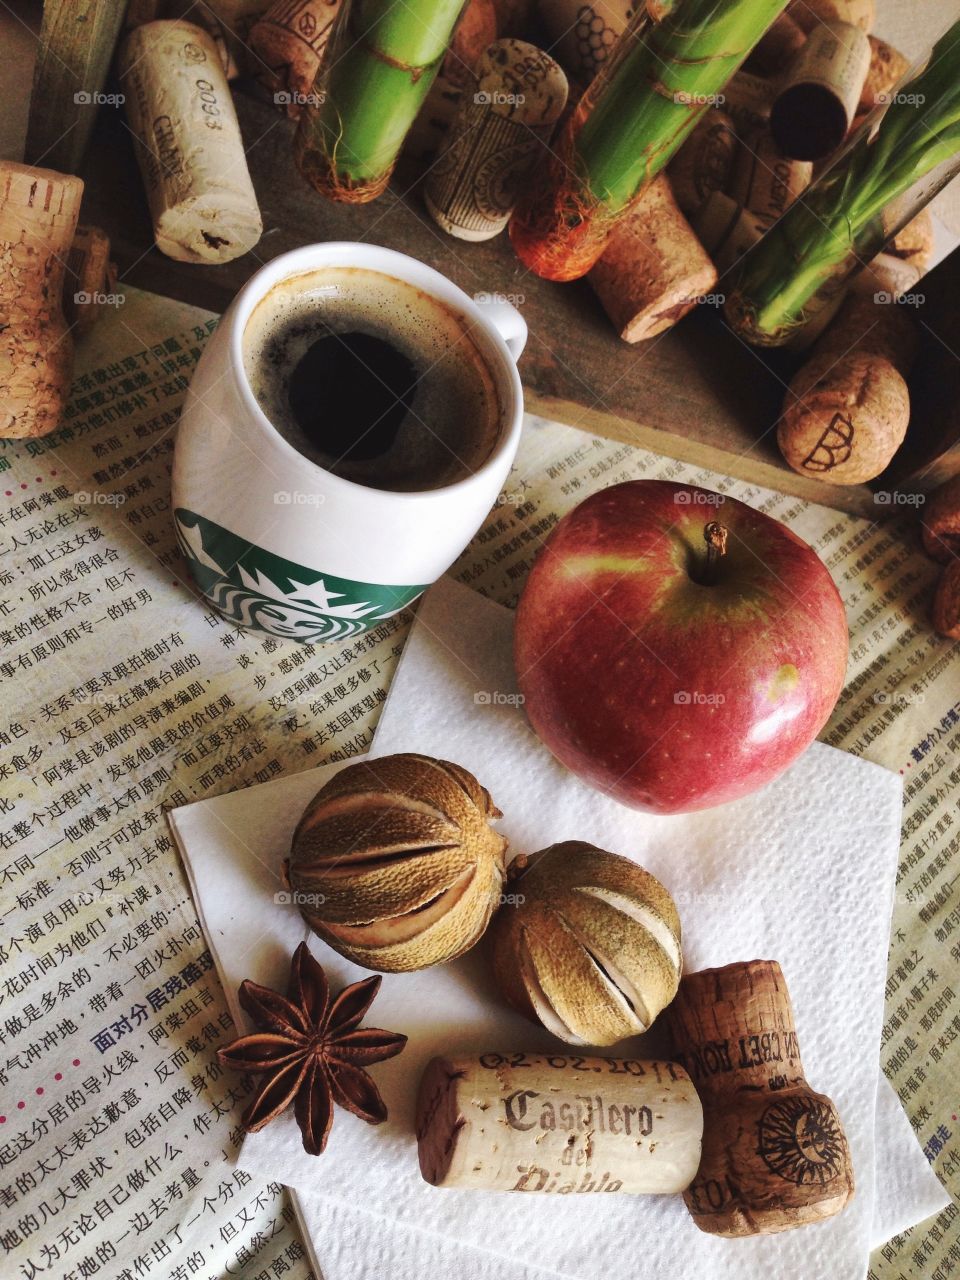 Coffee break . Coffee with apple to wake up) 